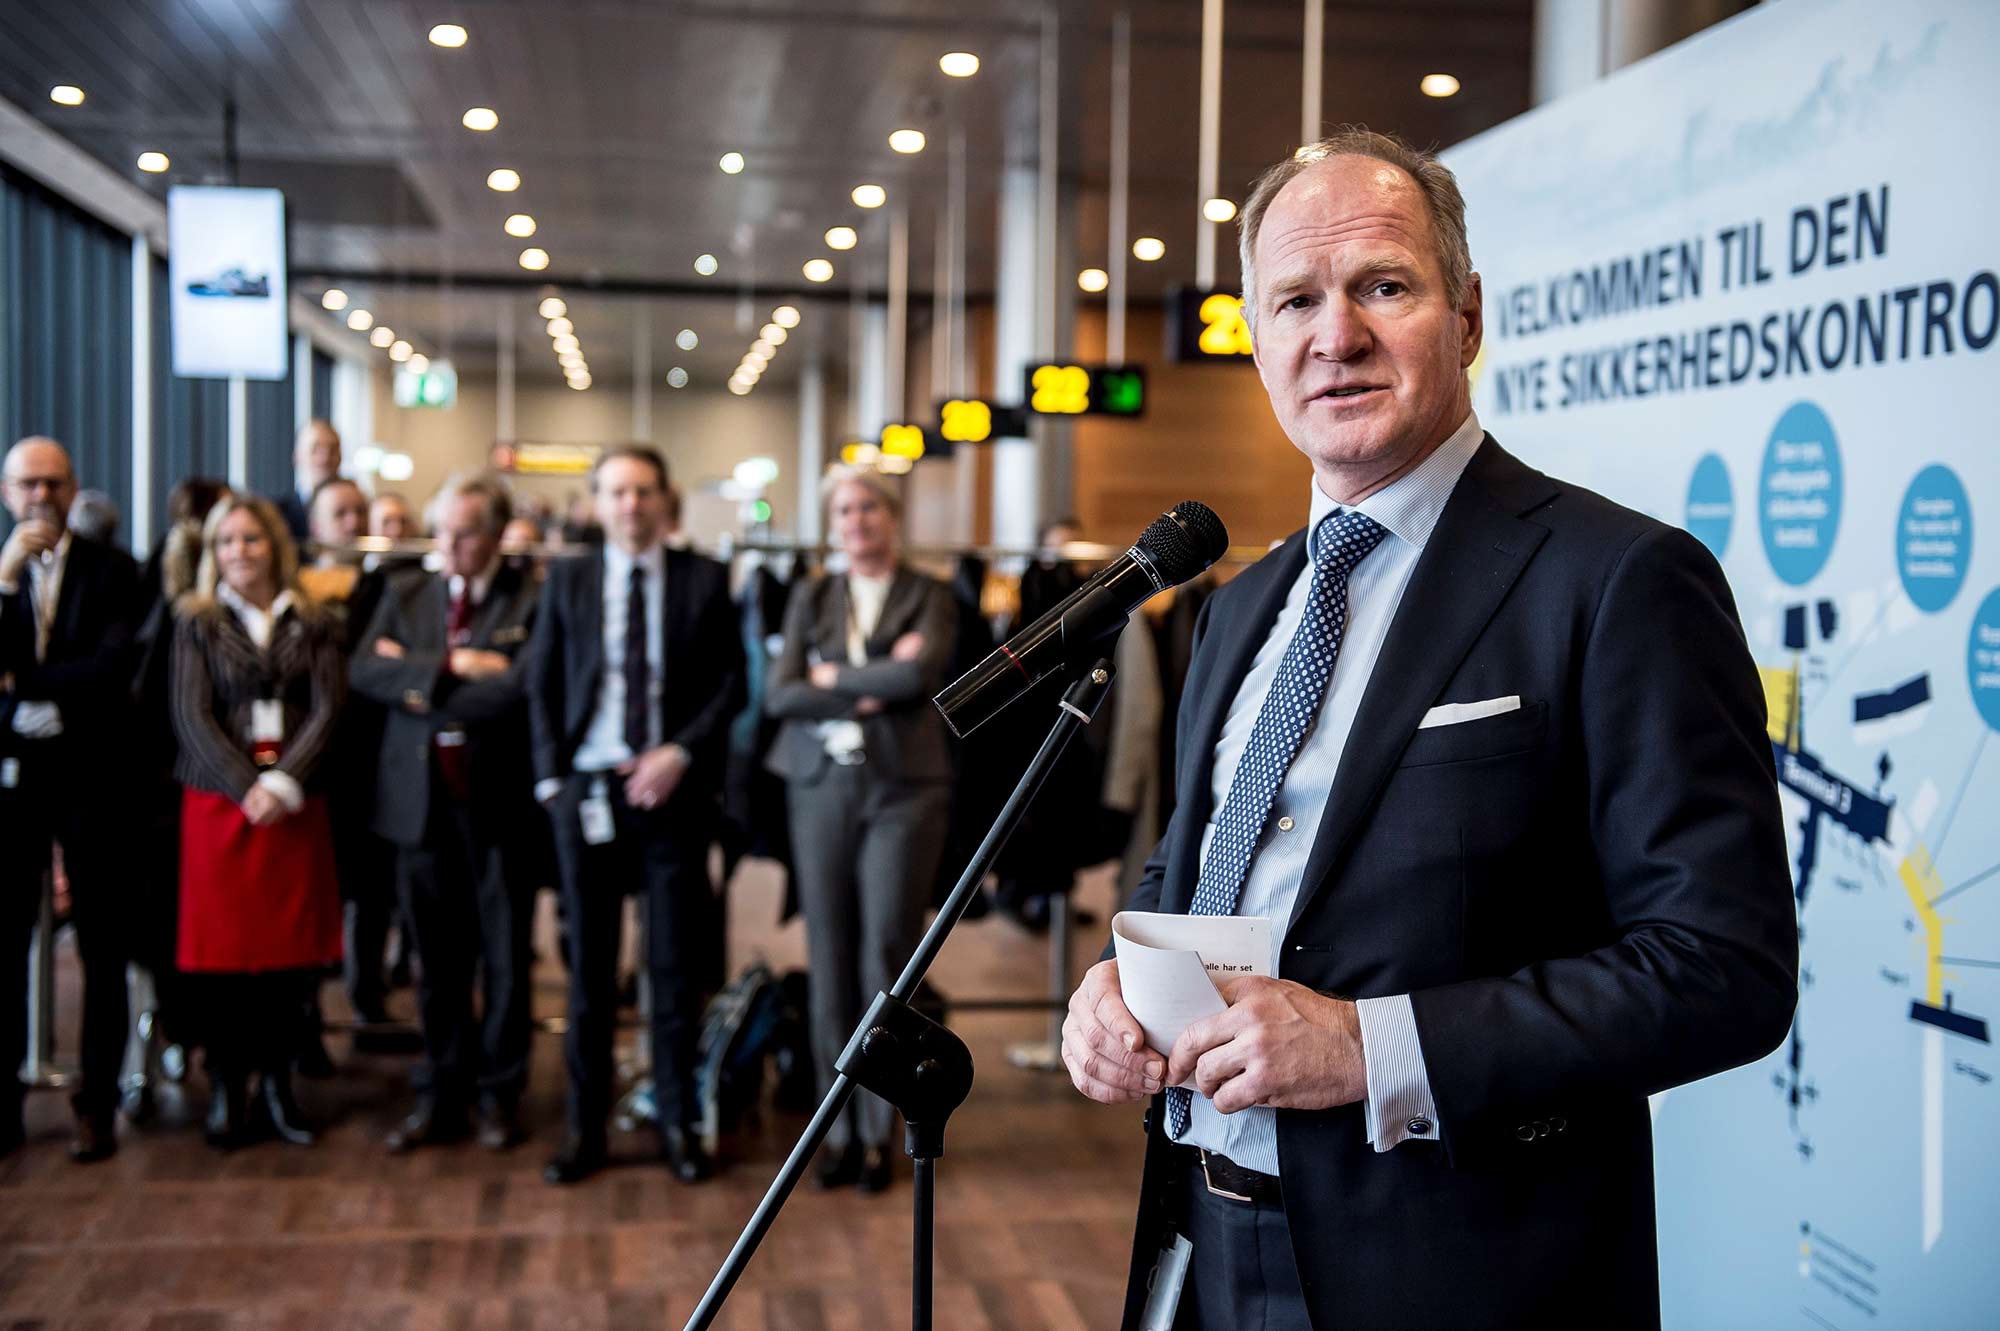 Incoming Heathrow CEO Thomas Woldbye speaks at the opening of a new extended security control at Copenhagen Airport. 